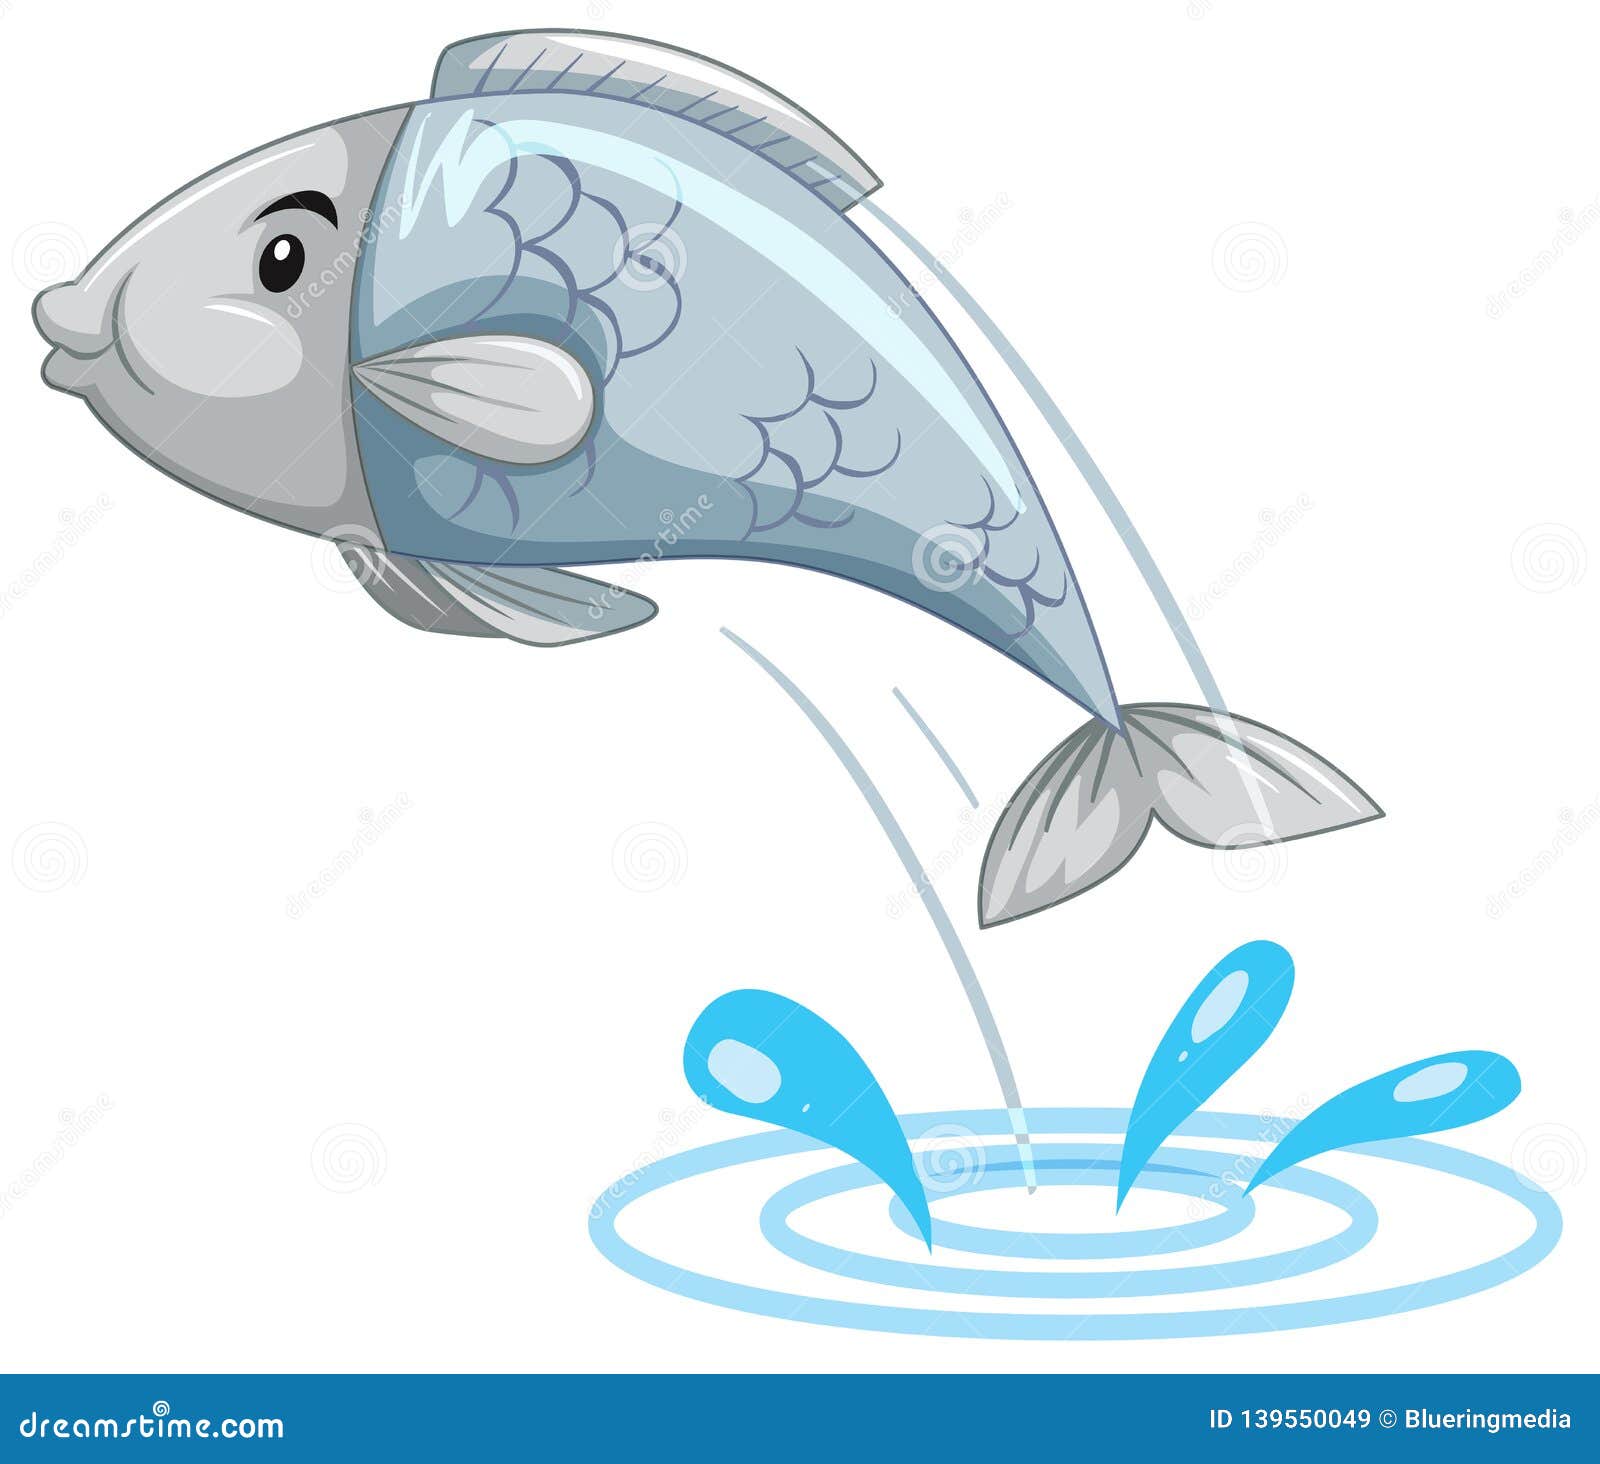 Simple Fish Jumping Off the Water Stock Vector - Illustration of animal,  background: 139550049